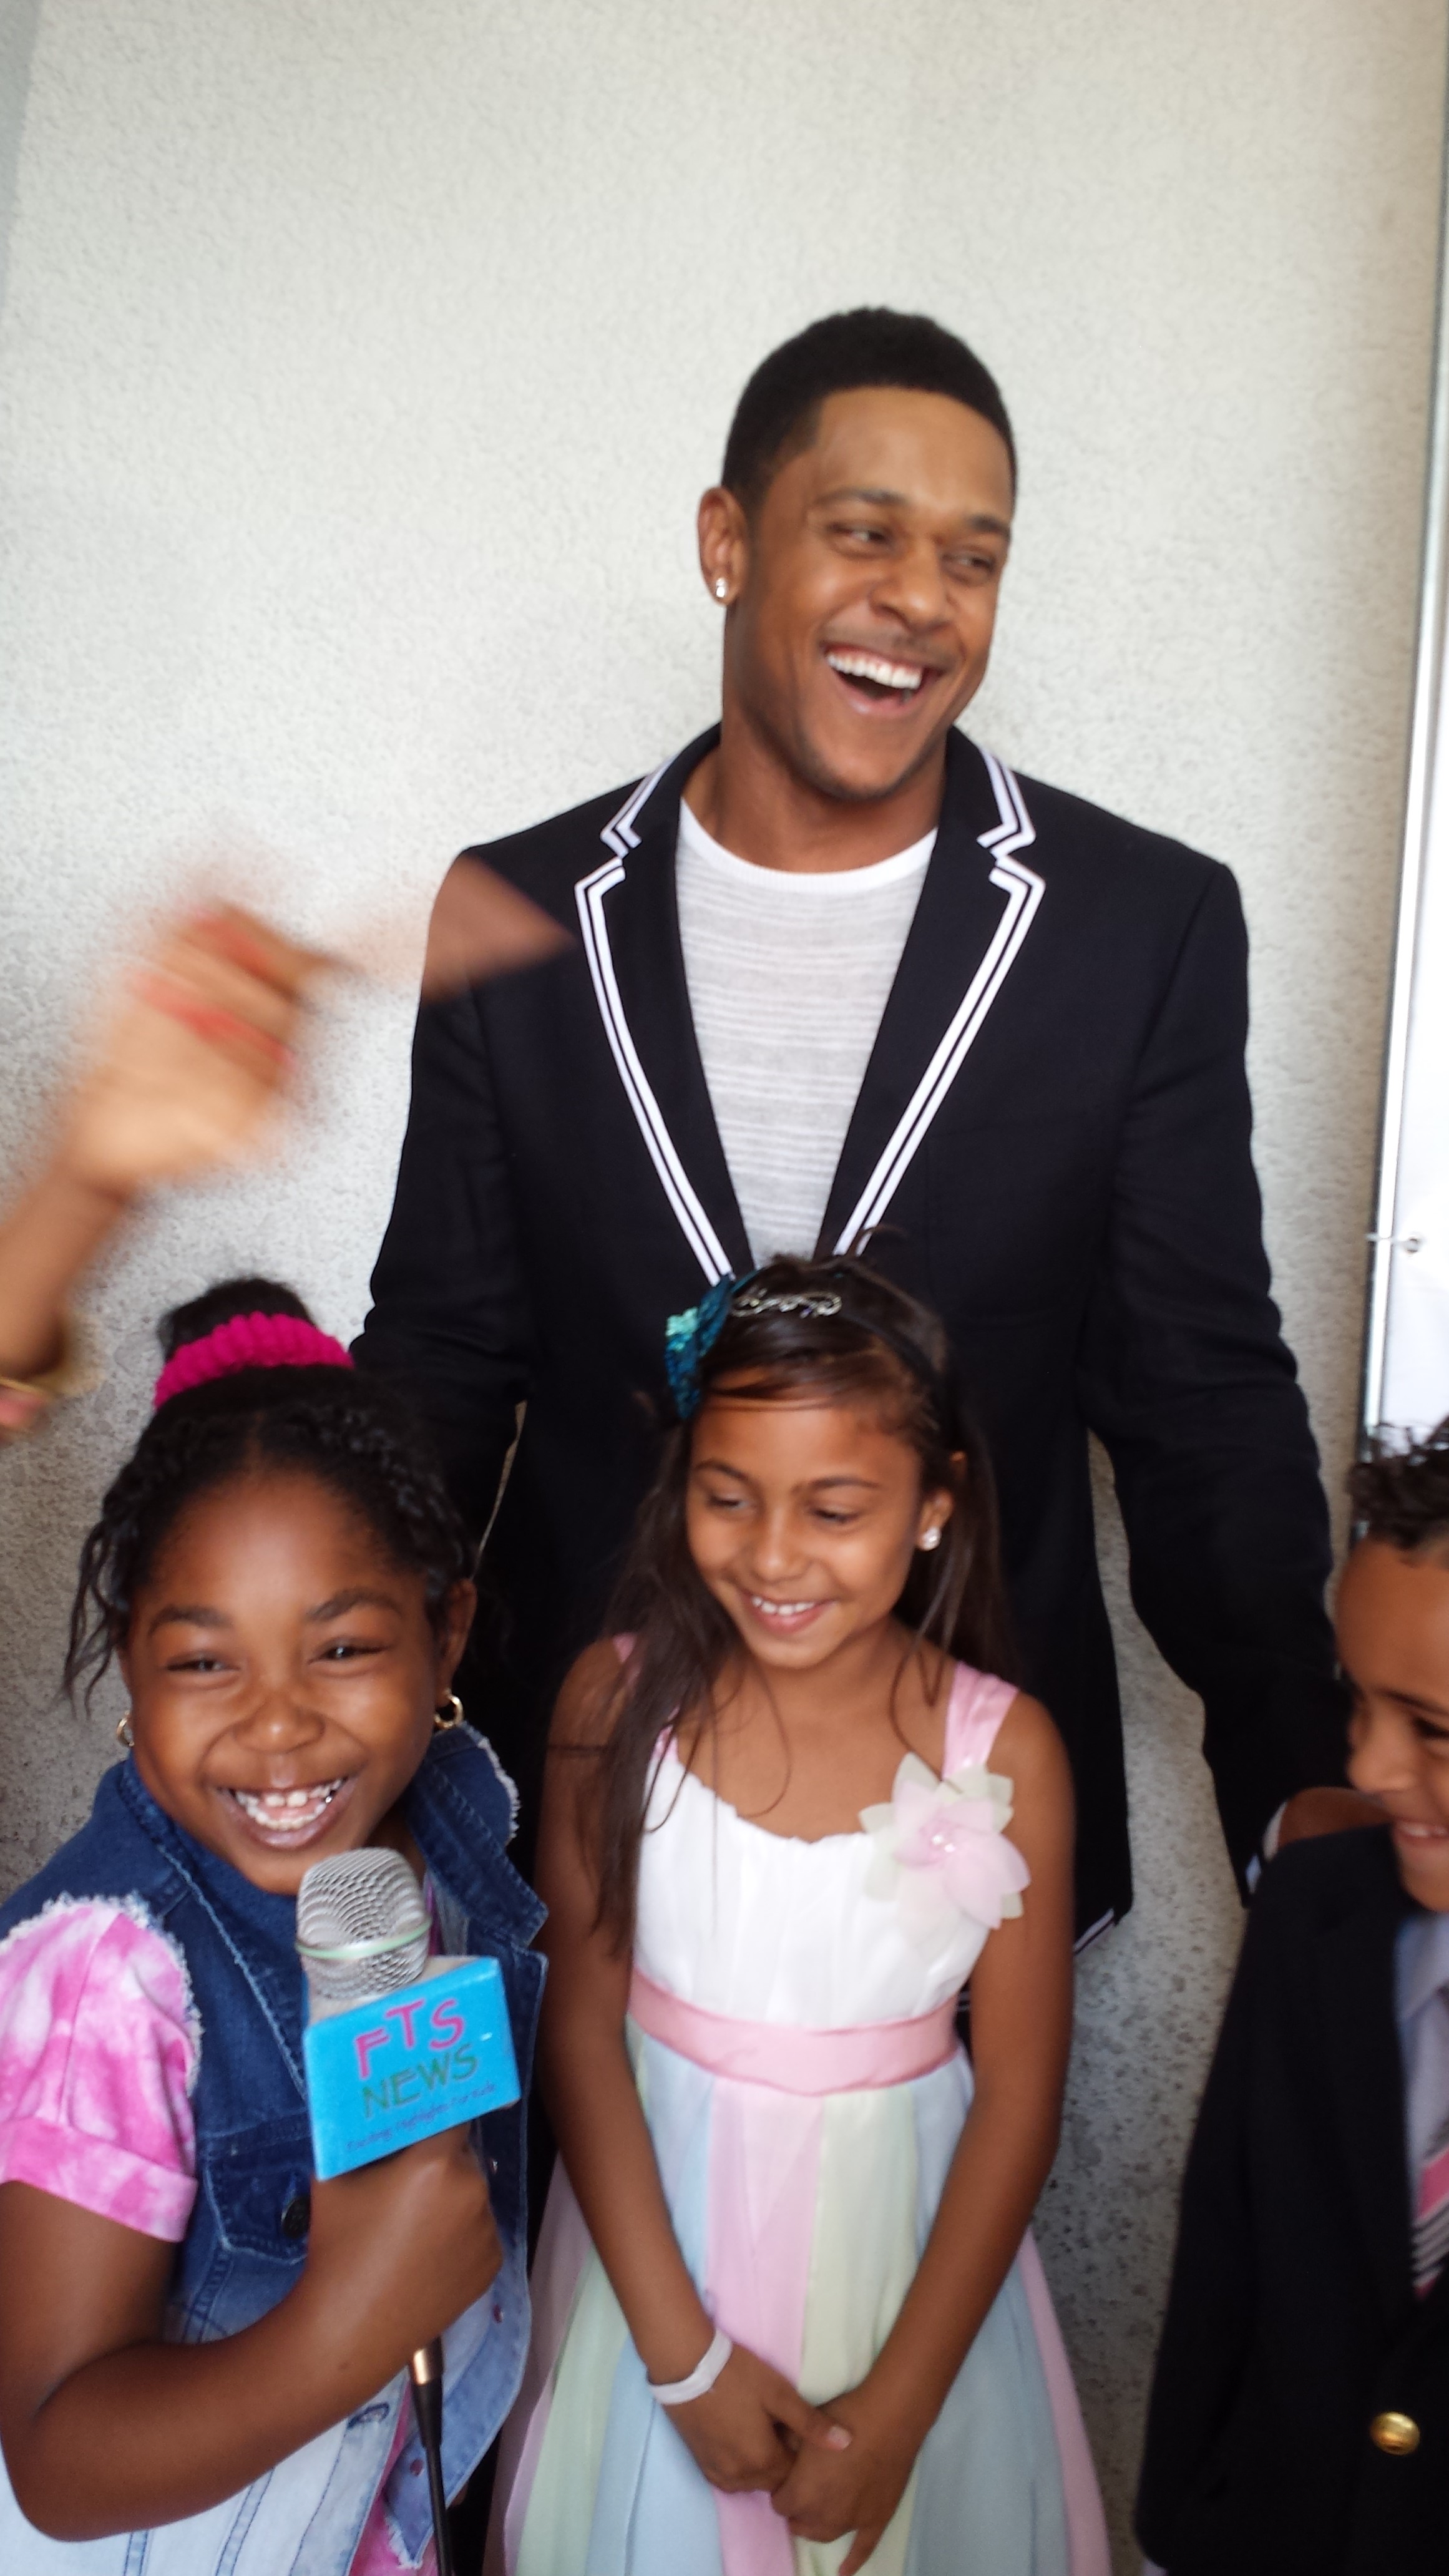 Jessica Mikayla Adams Just Finished Interviewing Pooch Hall and His Family at his daughters Dajani's Sweet 